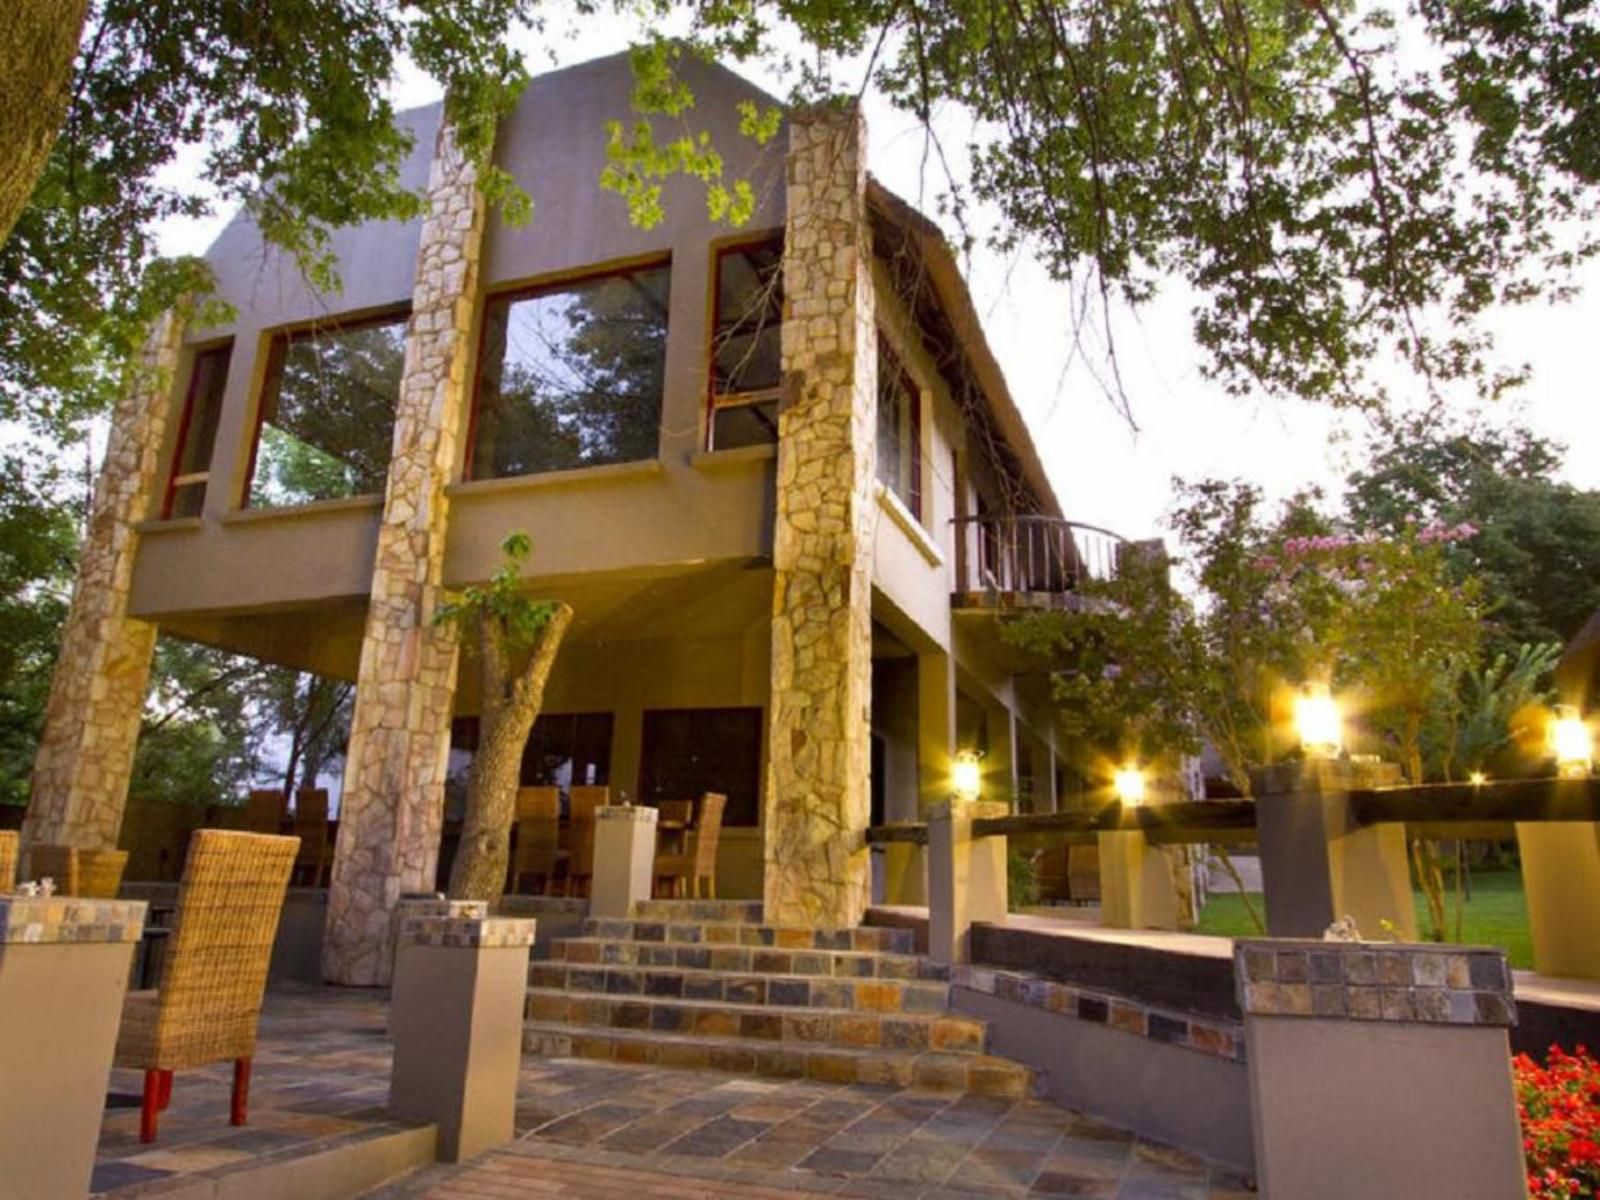 Africlassic Rivonia Rivonia Johannesburg Gauteng South Africa House, Building, Architecture